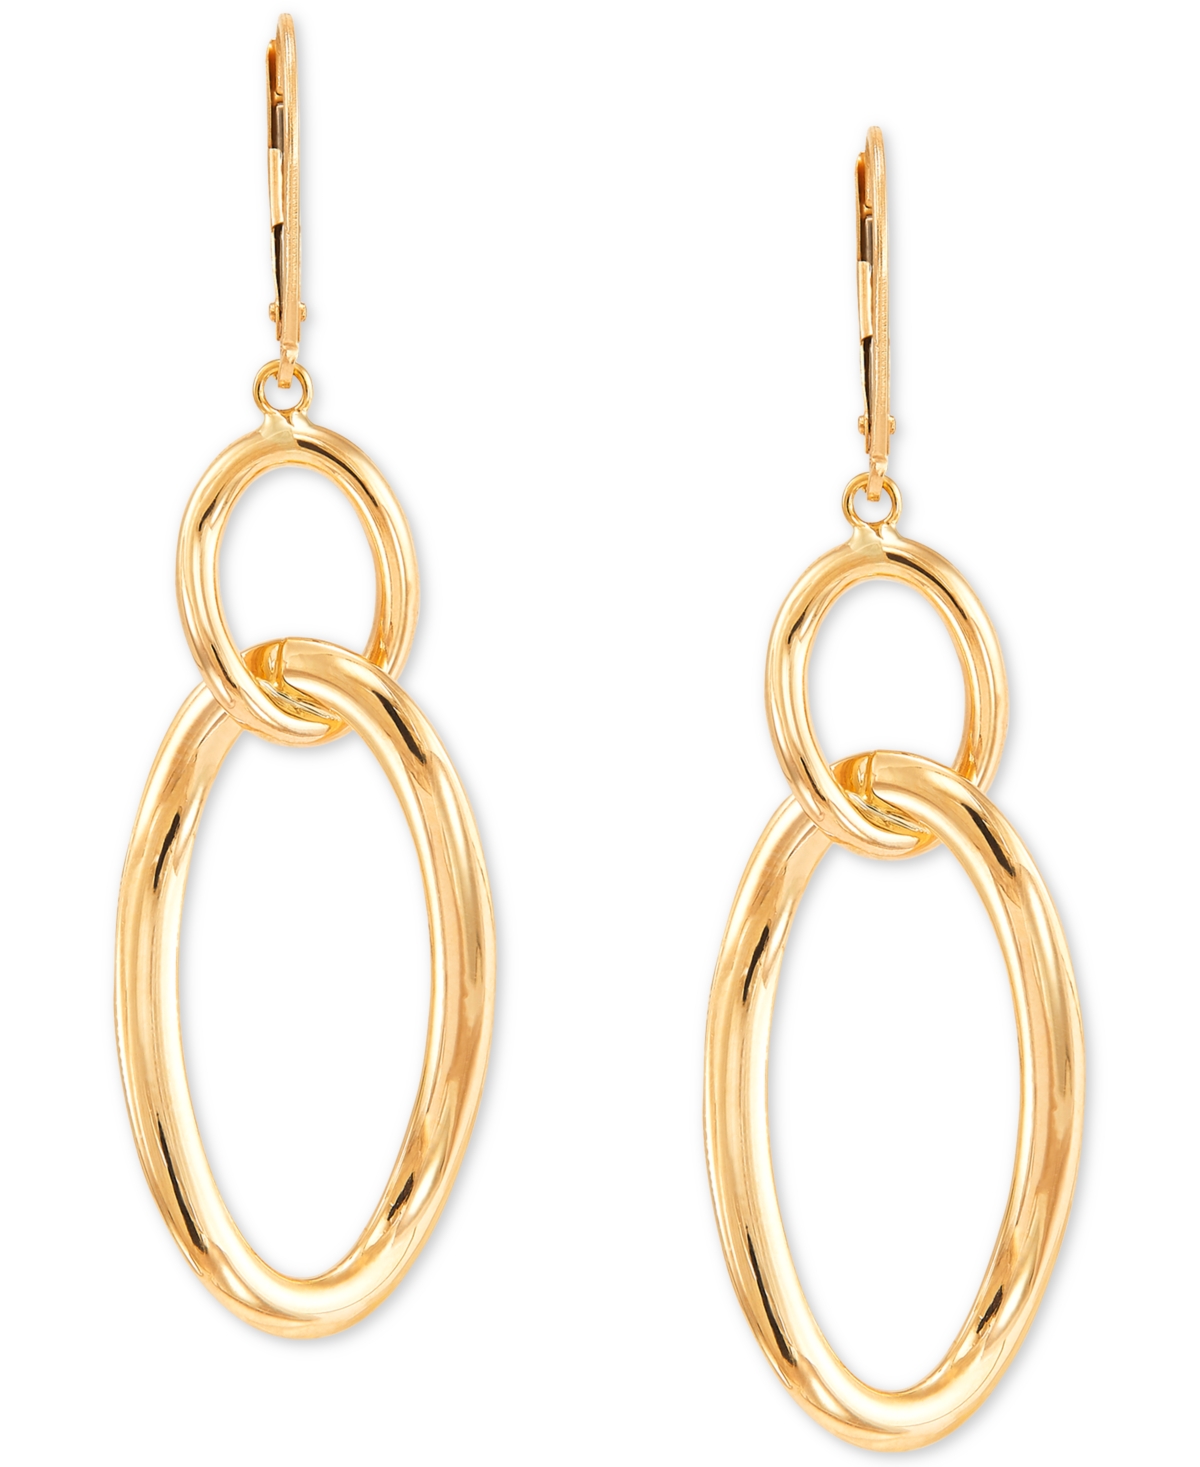 Circle and Oval Leverback Drop Earrings in 10k Gold - Gold